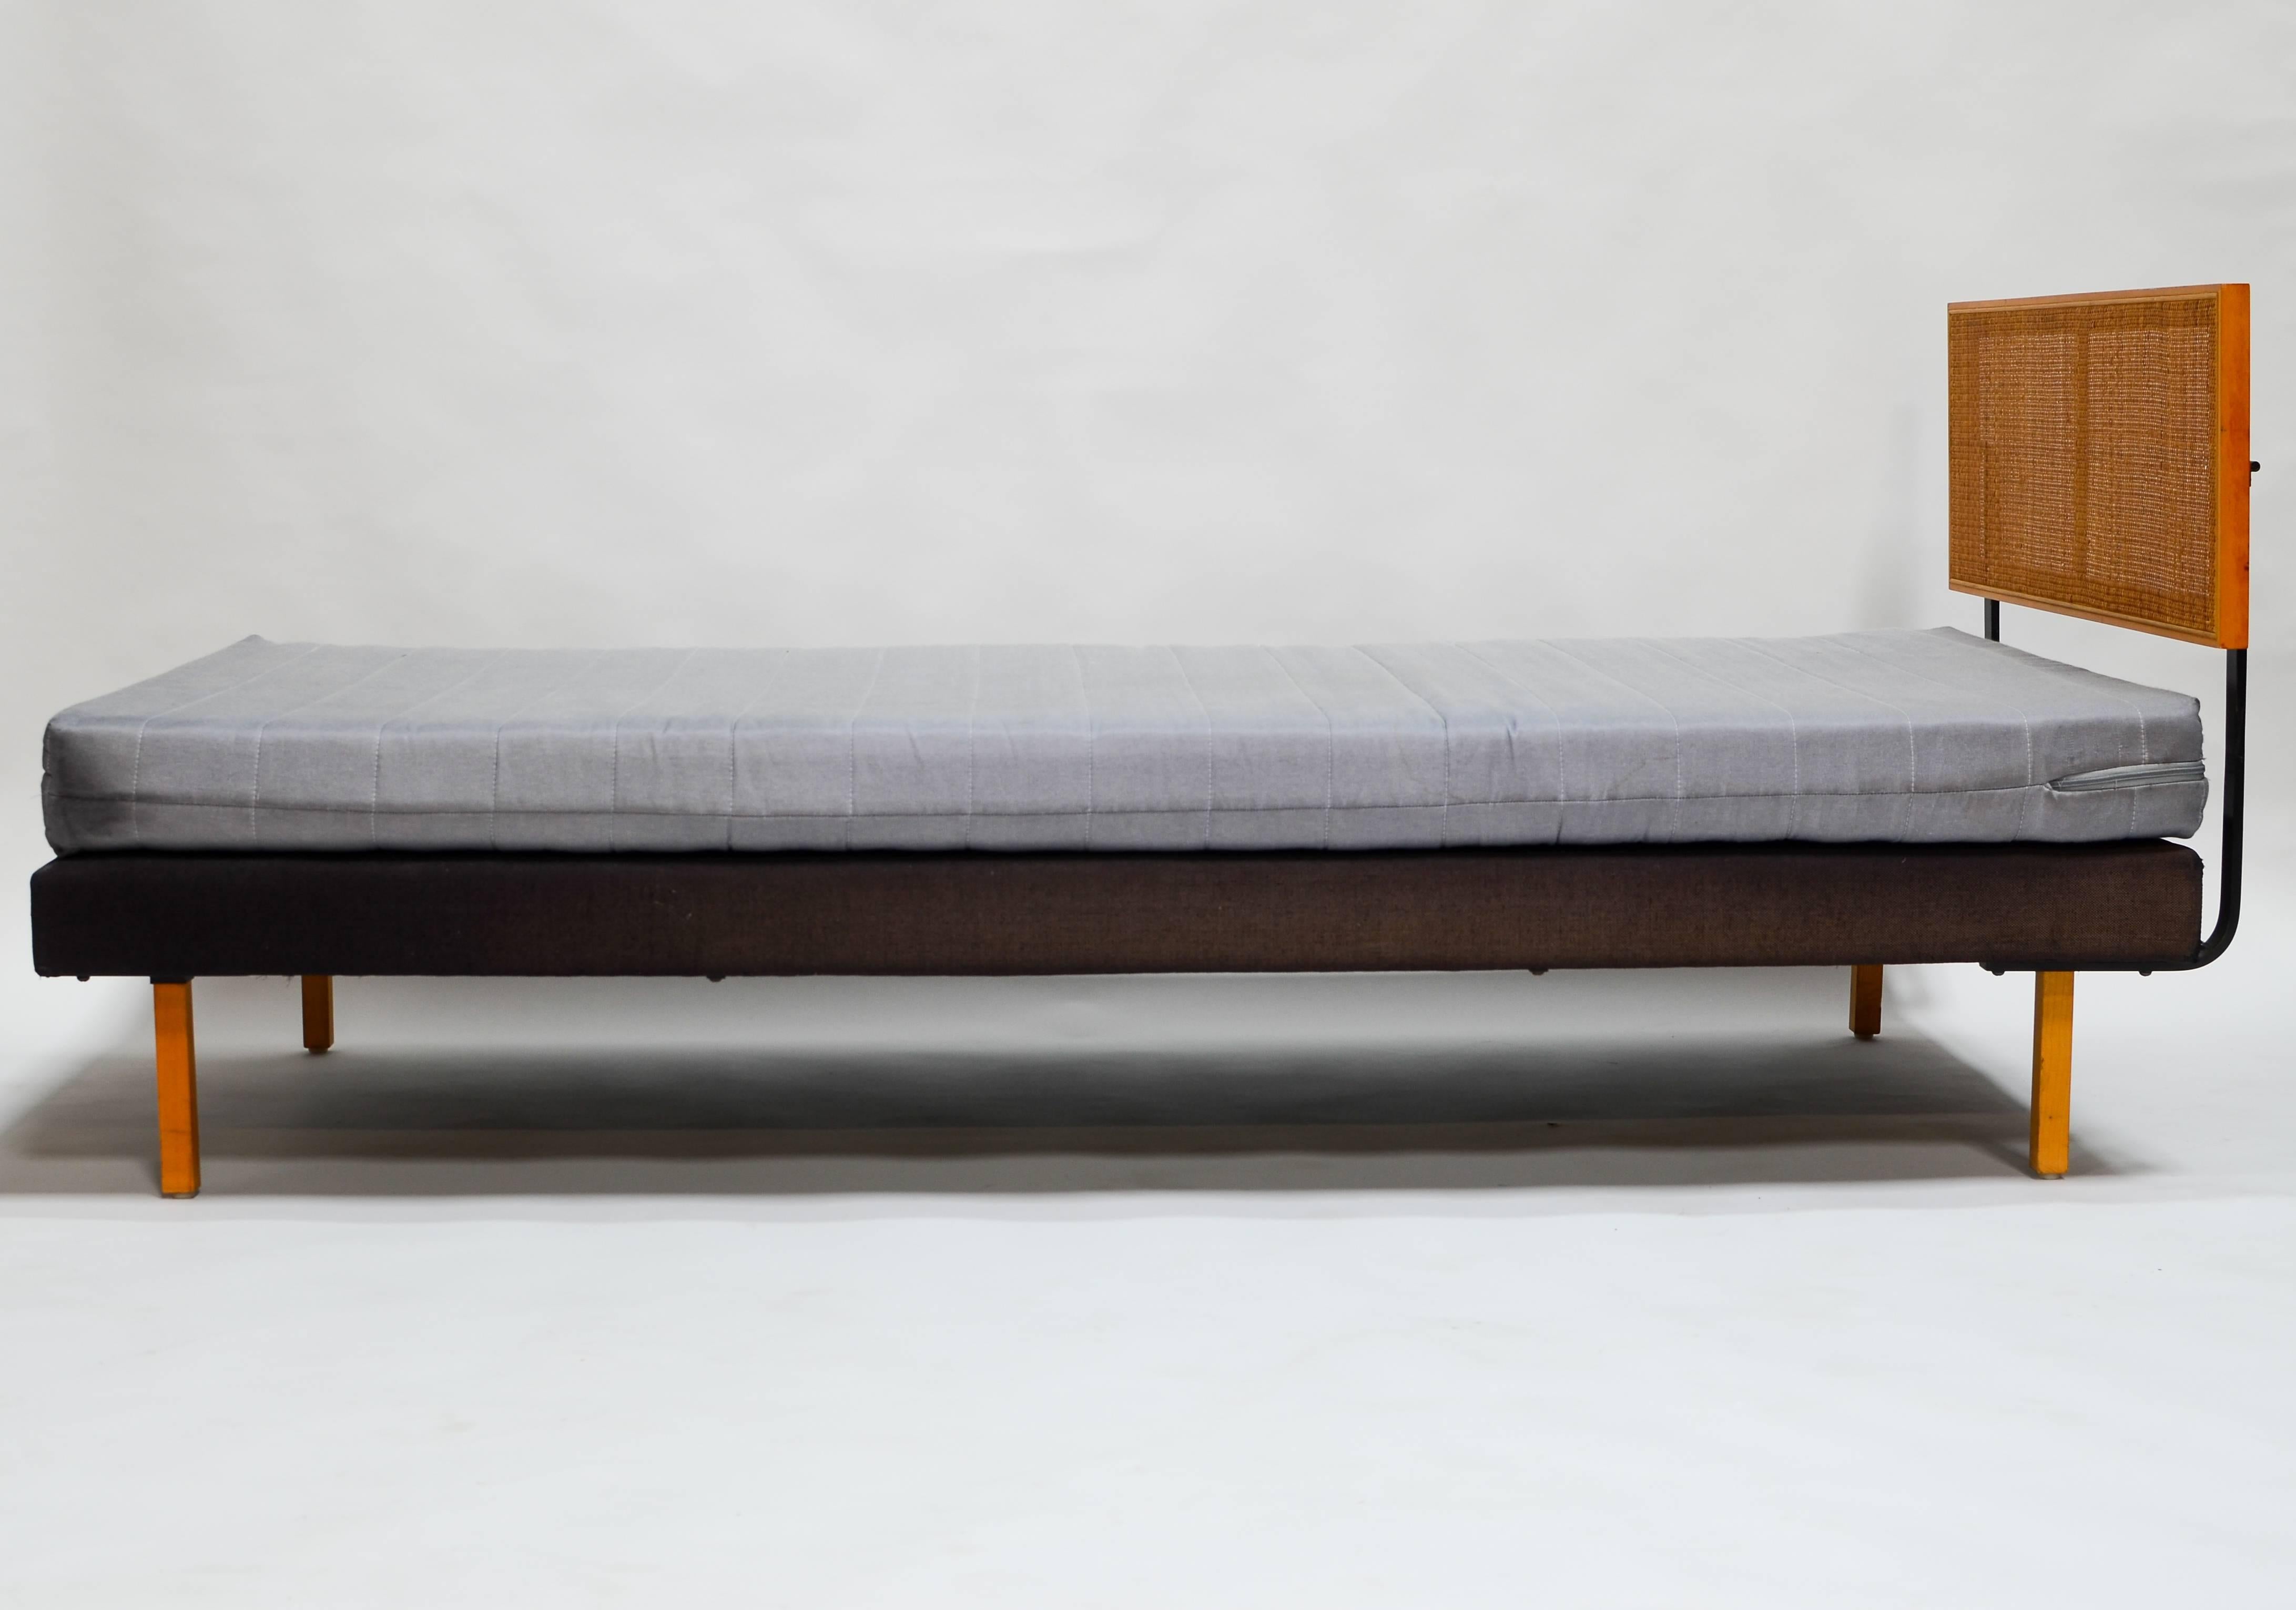 Rarely seen daybed designed by Richard Schultz for Knoll Inc., circa 1960s. This piece is in all original condition and ready to be recovered. Extremely well made piece. Features an adjustable rattan headboard/arm. This is a very versatile piece,